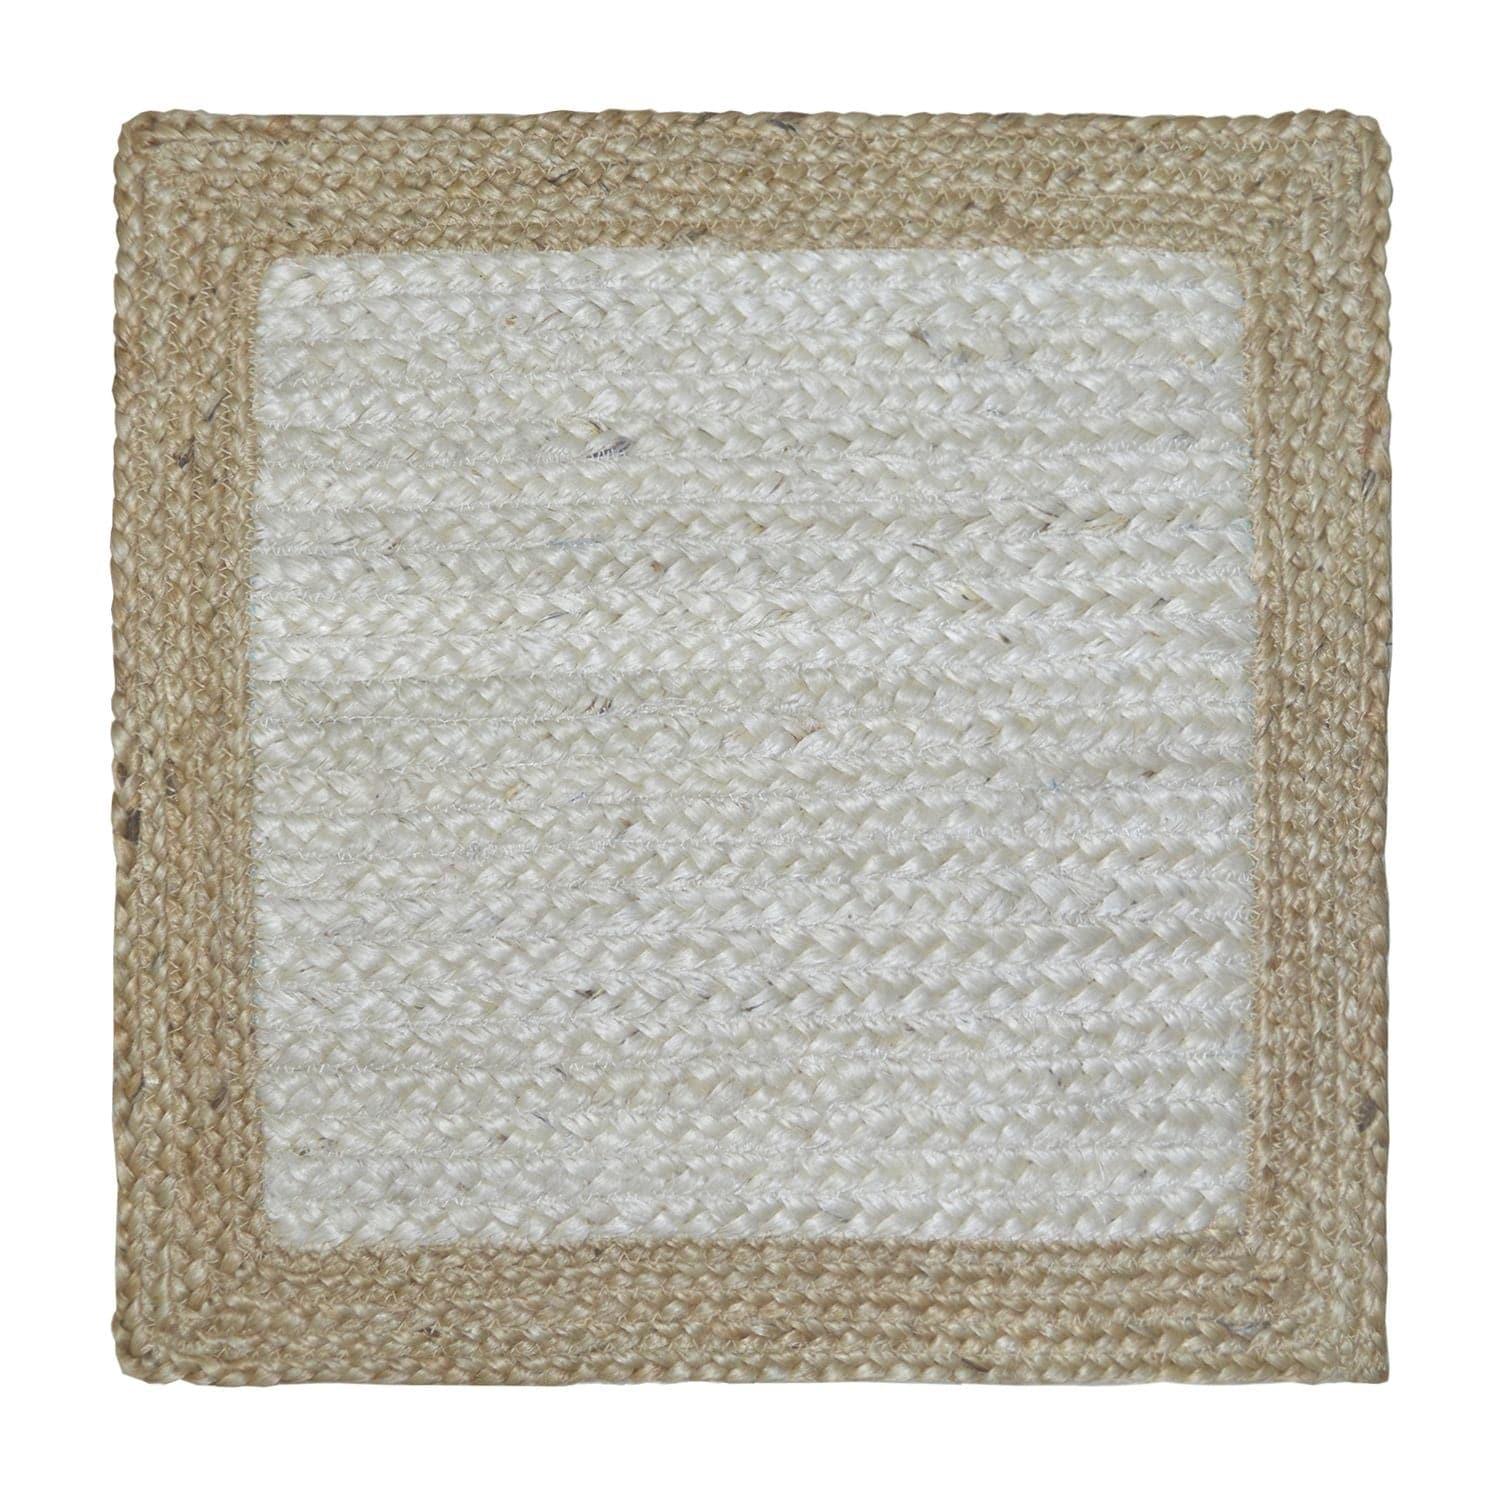 Two-Tone Braided Jute Square Placemat - Set of 10 - MAIA HOMES